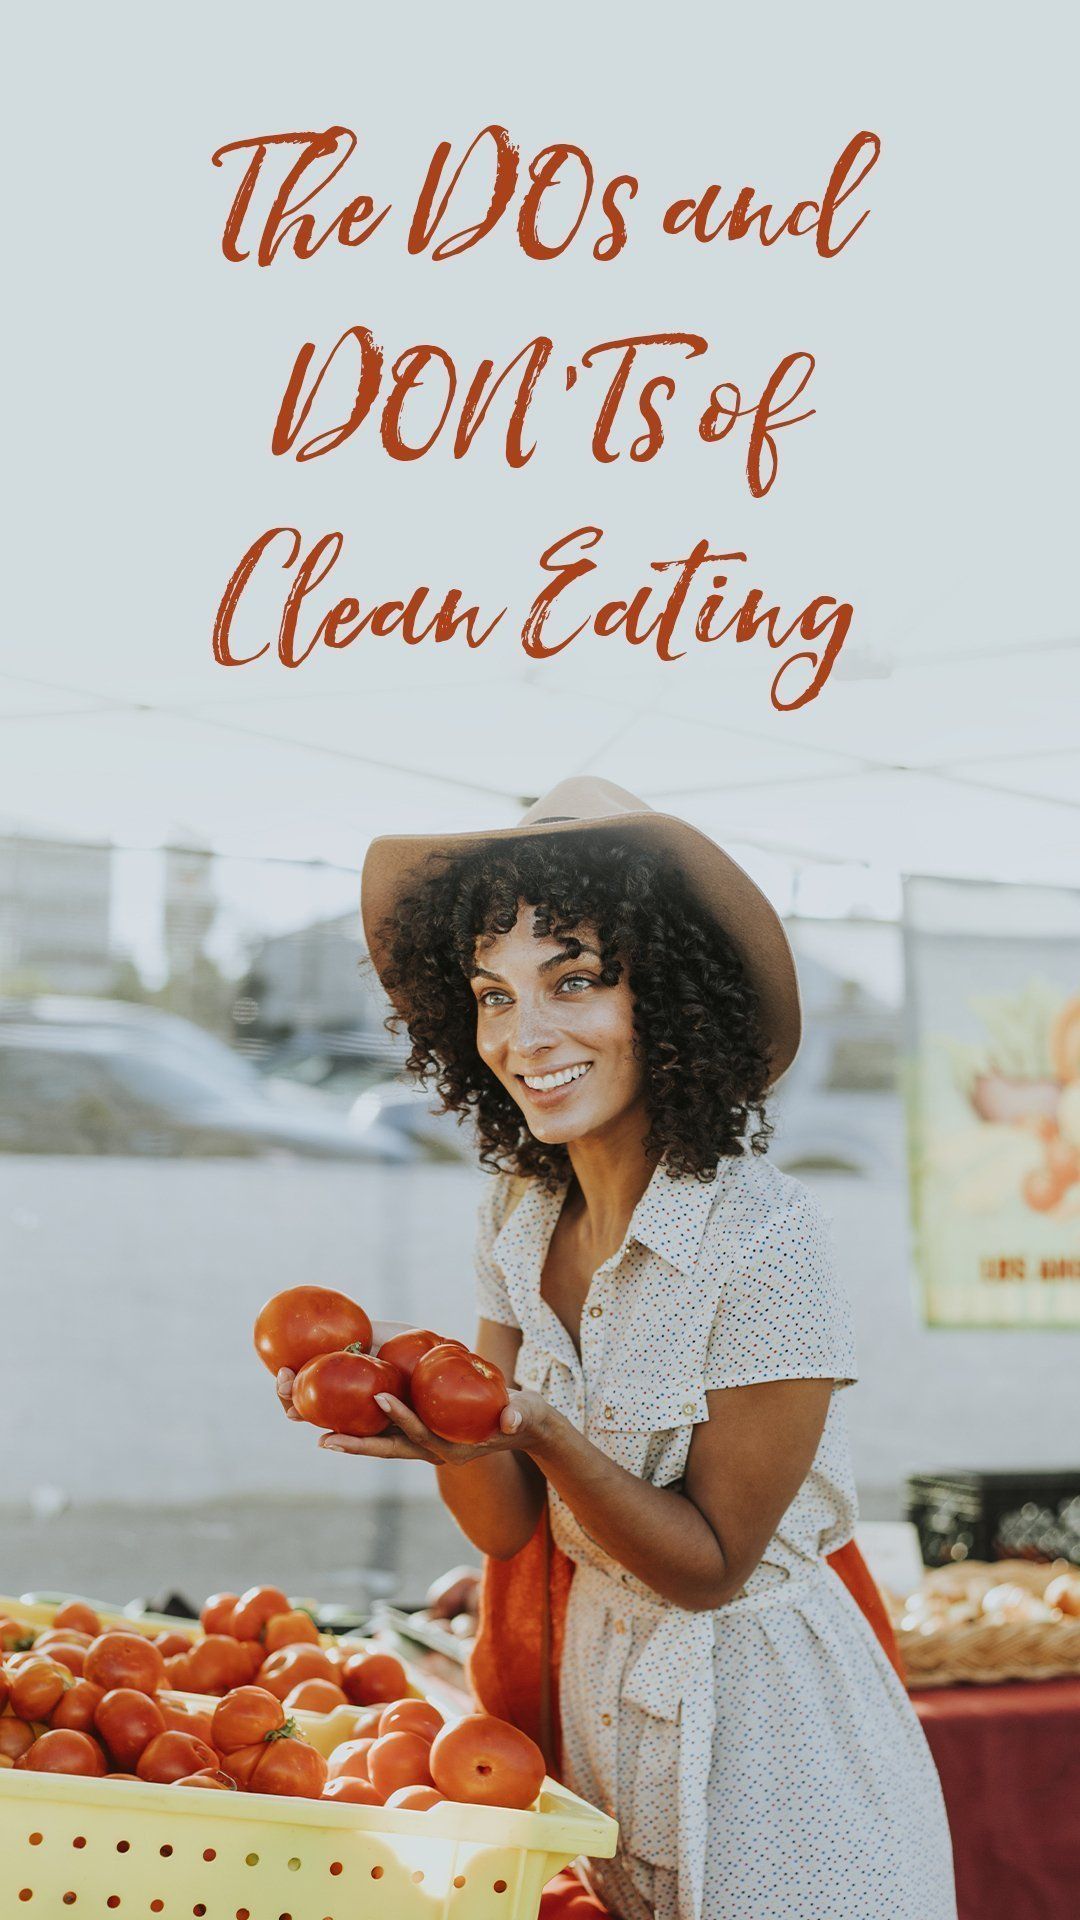 The DOs and DON'Ts of Clean Eating -   22 healthy diet habits
 ideas